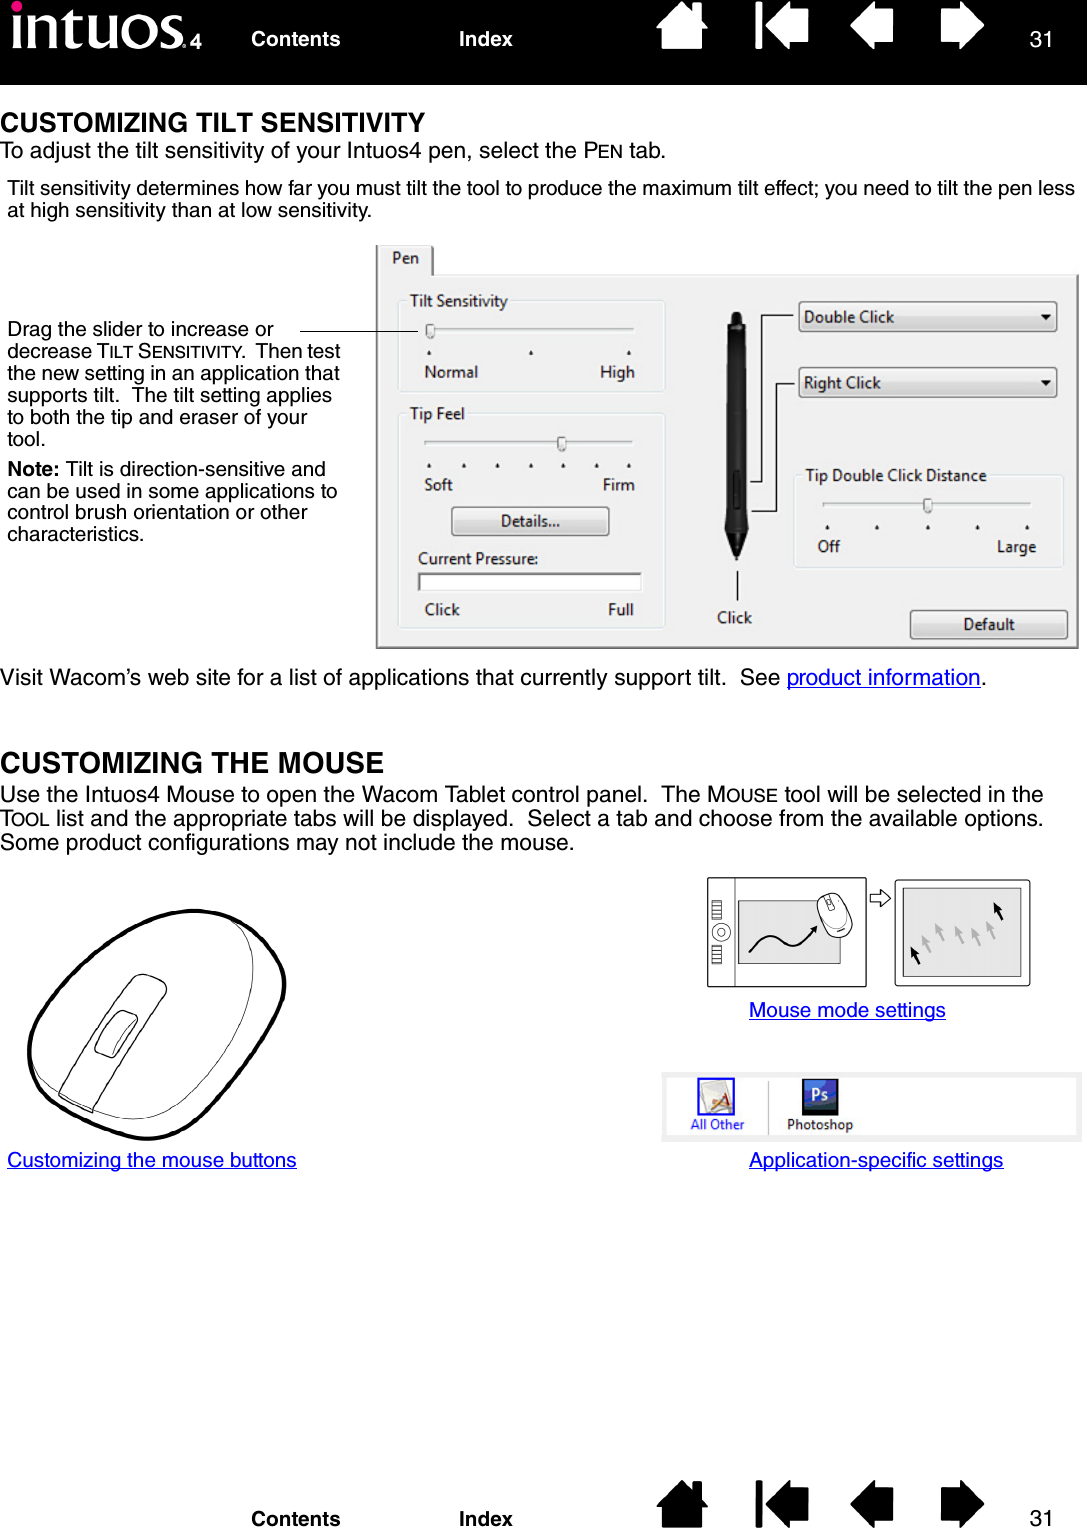 3131IndexContentsIndexContentsCUSTOMIZING TILT SENSITIVITYTo adjust the tilt sensitivity of your Intuos4 pen, select the PEN tab.Visit Wacom’s web site for a list of applications that currently support tilt.  See product information.CUSTOMIZING THE MOUSEUse the Intuos4 Mouse to open the Wacom Tablet control panel.  The MOUSE tool will be selected in the TOOL list and the appropriate tabs will be displayed.  Select a tab and choose from the available options.  Some product configurations may not include the mouse.Drag the slider to increase or decrease TILT SENSITIVITY.  Then test the new setting in an application that supports tilt.  The tilt setting applies to both the tip and eraser of your tool.Note: Tilt is direction-sensitive and can be used in some applications to control brush orientation or other characteristics.Tilt sensitivity determines how far you must tilt the tool to produce the maximum tilt effect; you need to tilt the pen less at high sensitivity than at low sensitivity.Customizing the mouse buttonsMouse mode settingsApplication-specific settings